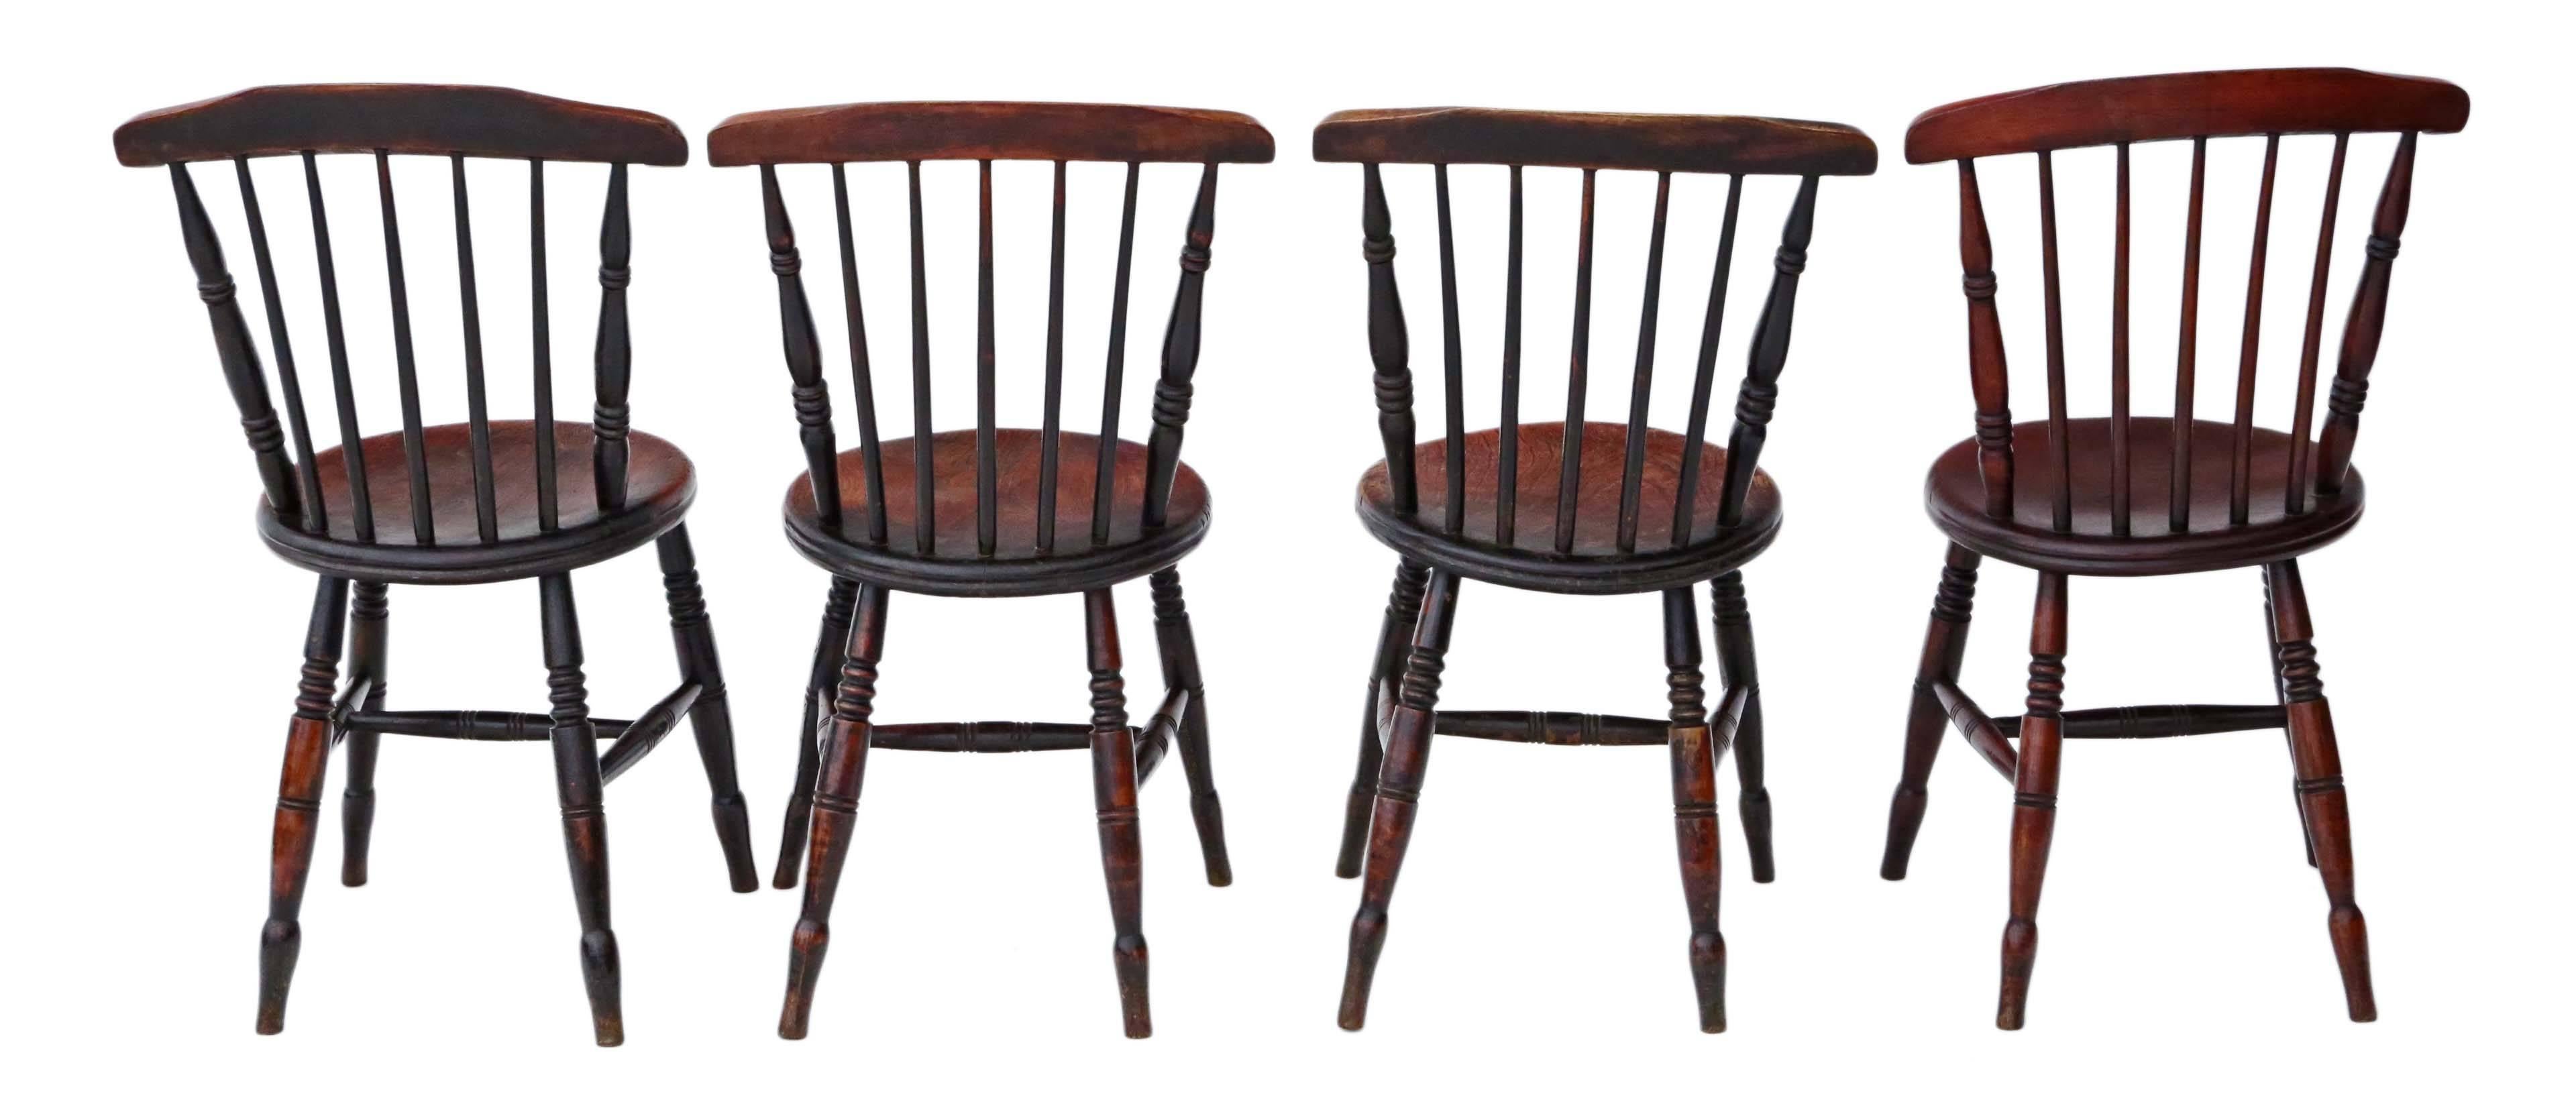 Antique set of four Victorian Penny Windsor elm and beech kitchen dining chairs, circa 1890.

Solid, no loose joints and no woodworm. Full of age, character and charm.

Would look great in the right location!

Measure: Overall maximum